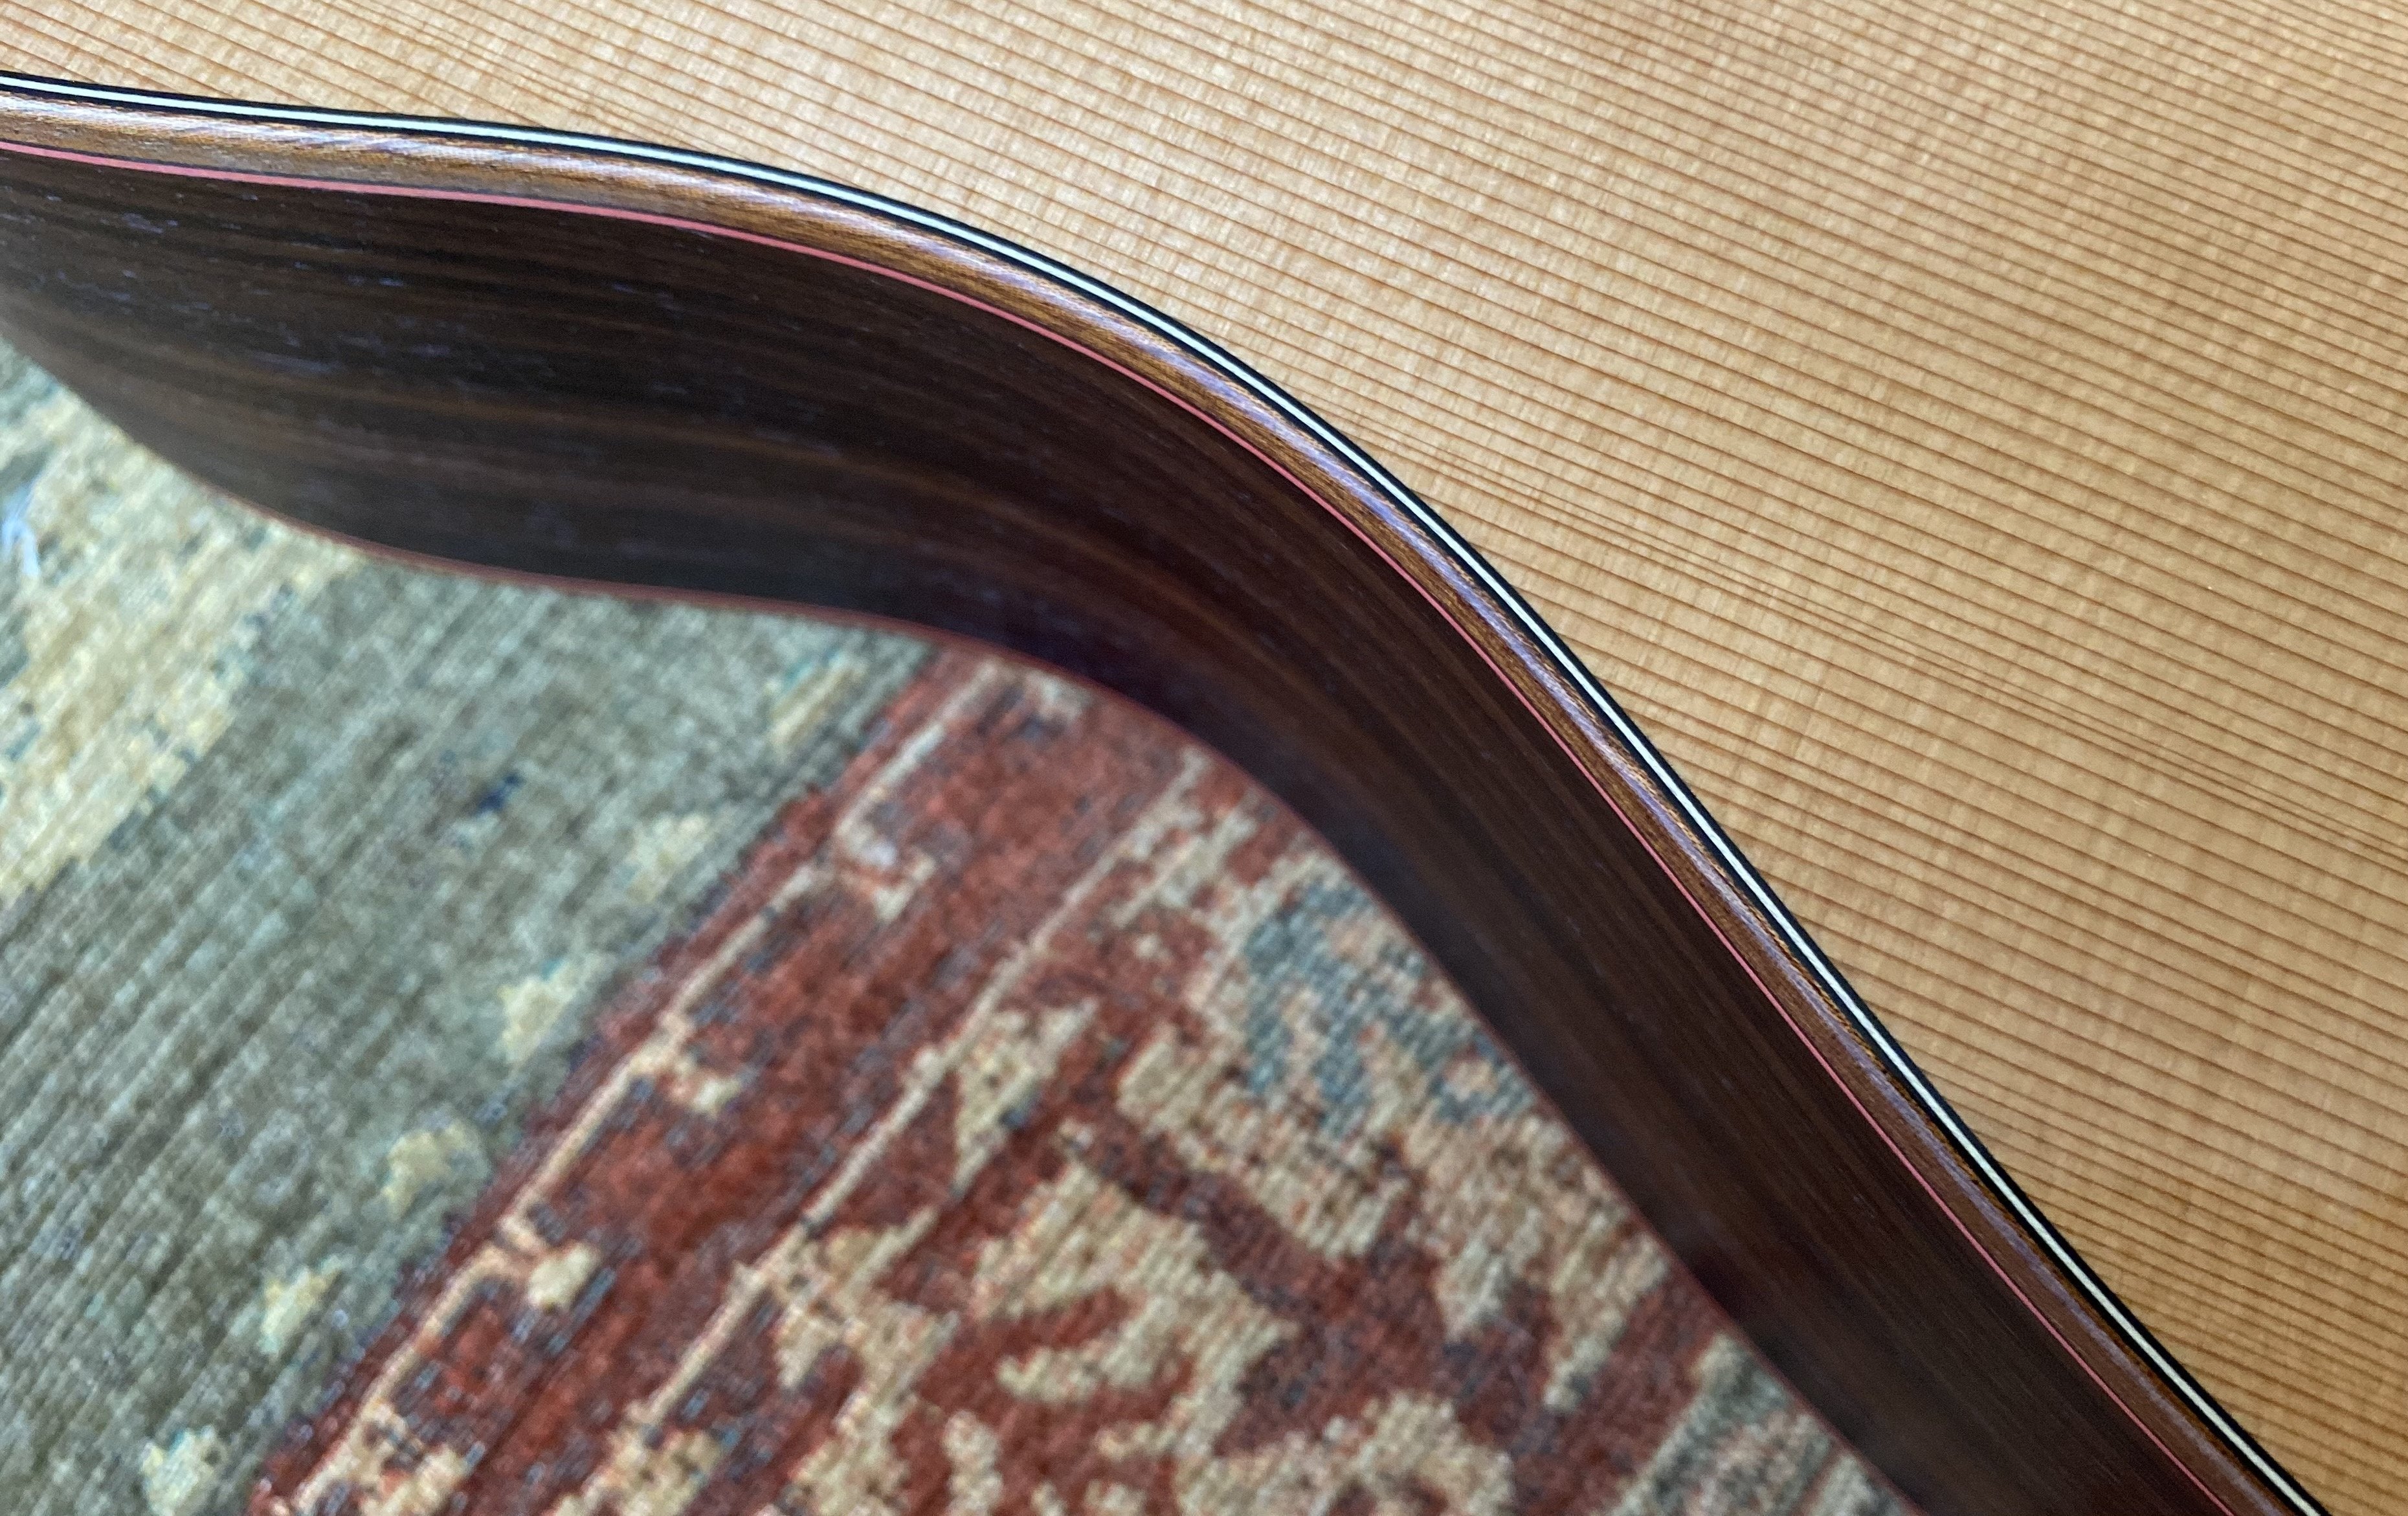 Dowina Rosewood / Maple / Rosewood Trio Plate (Amber Road) BVH Nylon Hybrid, Acoustic Guitar for sale at Richards Guitars.